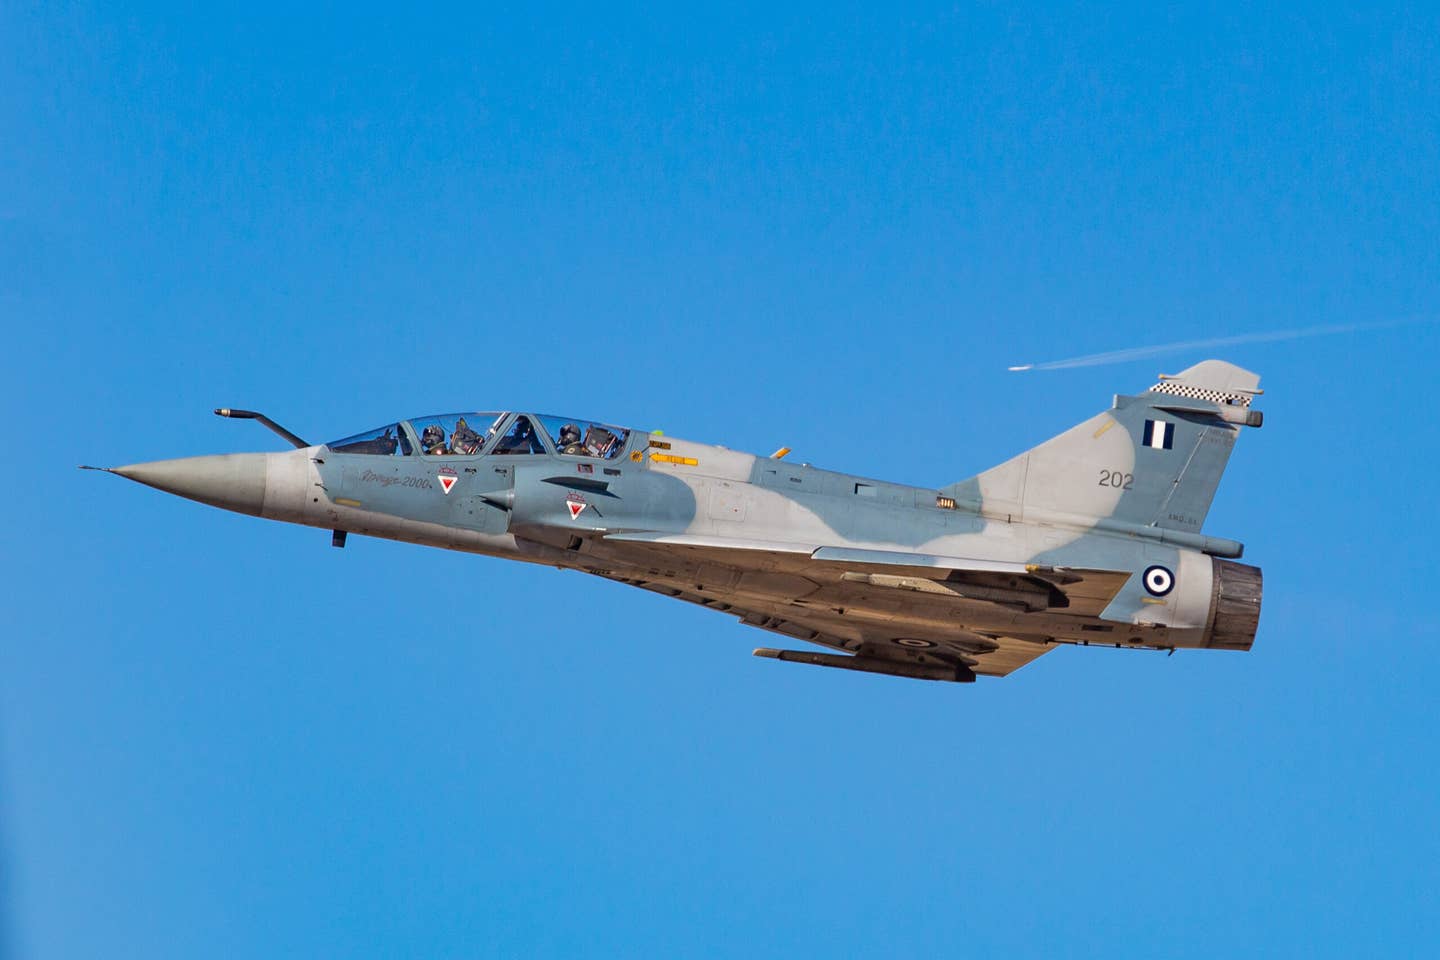 One of the Hellenic Air Force’s two-seat Mirage 2000BG combat trainers. <em>Photo by Nicolas Economou/NurPhoto via Getty Images</em>